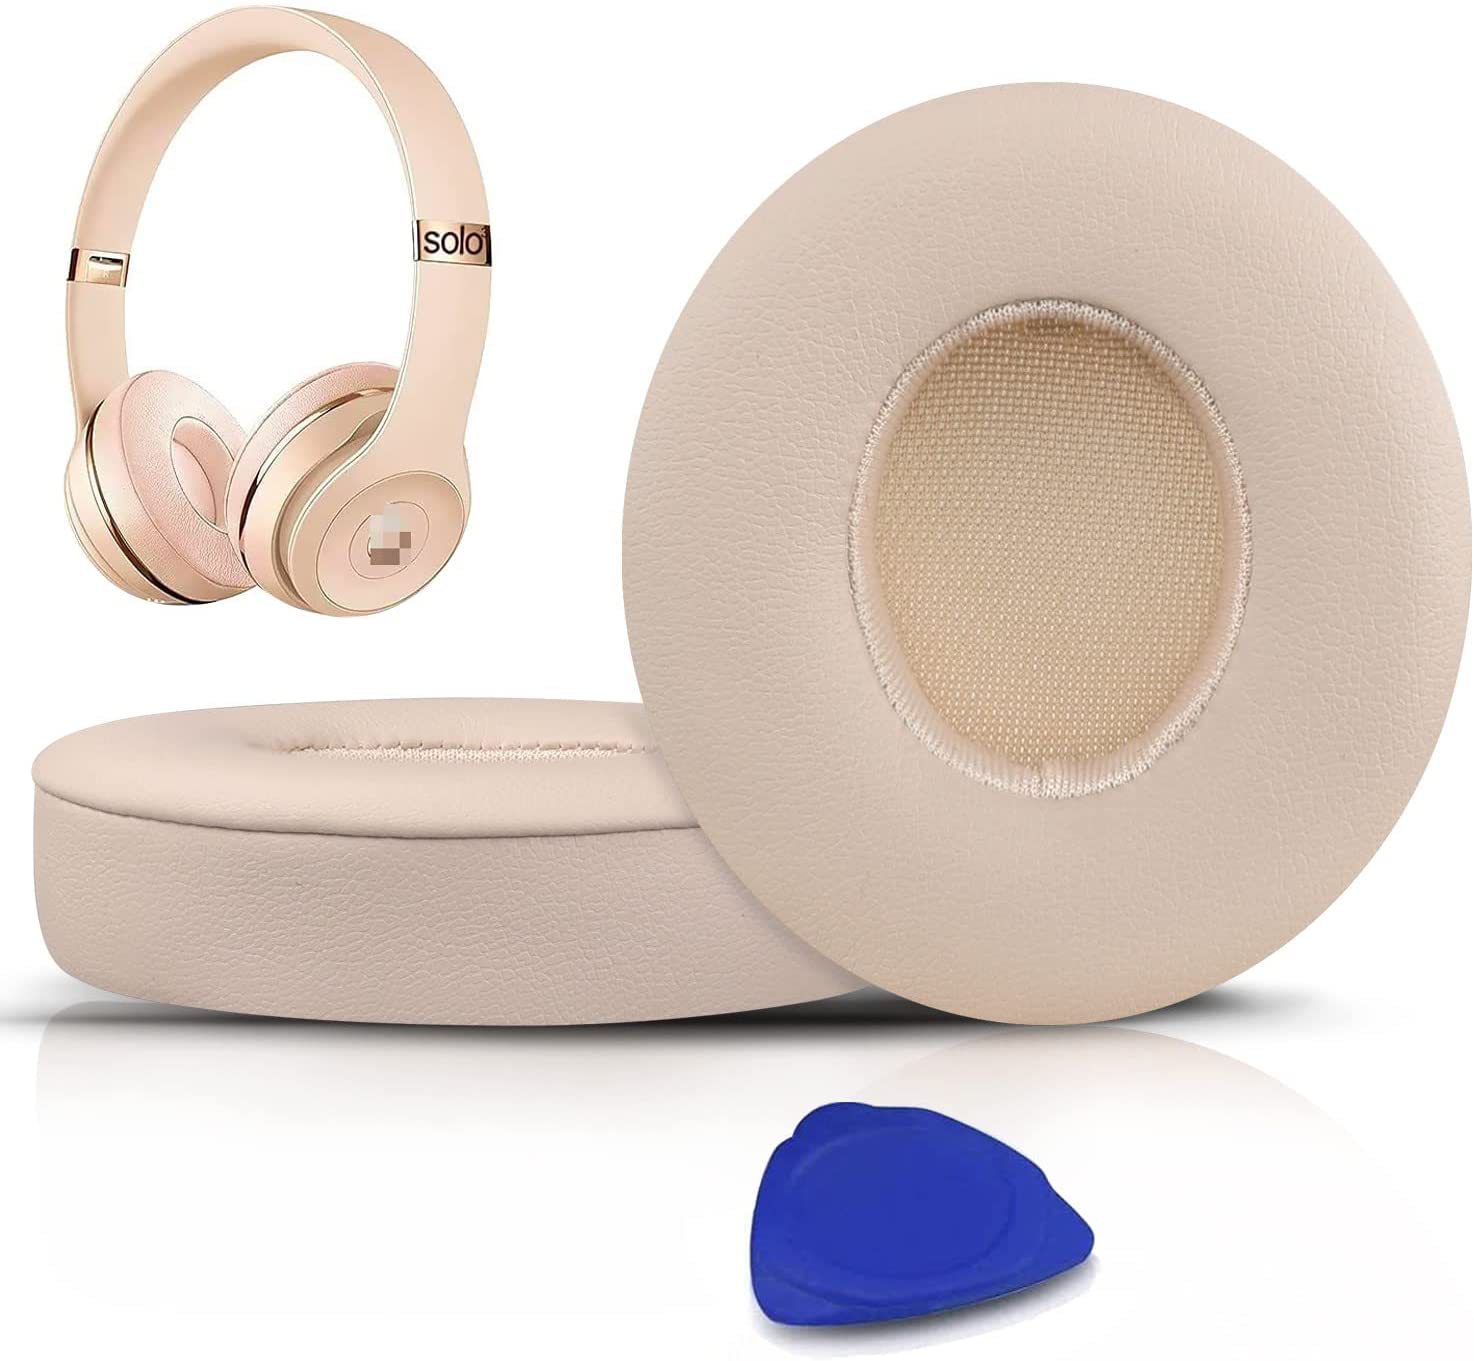 Pink Suitable for beats earbuds, solo2.0 earbuds, solo2 Wireless Bluetooth earbuds, solo3 sponge earbuds, set in sets of 2  solo3